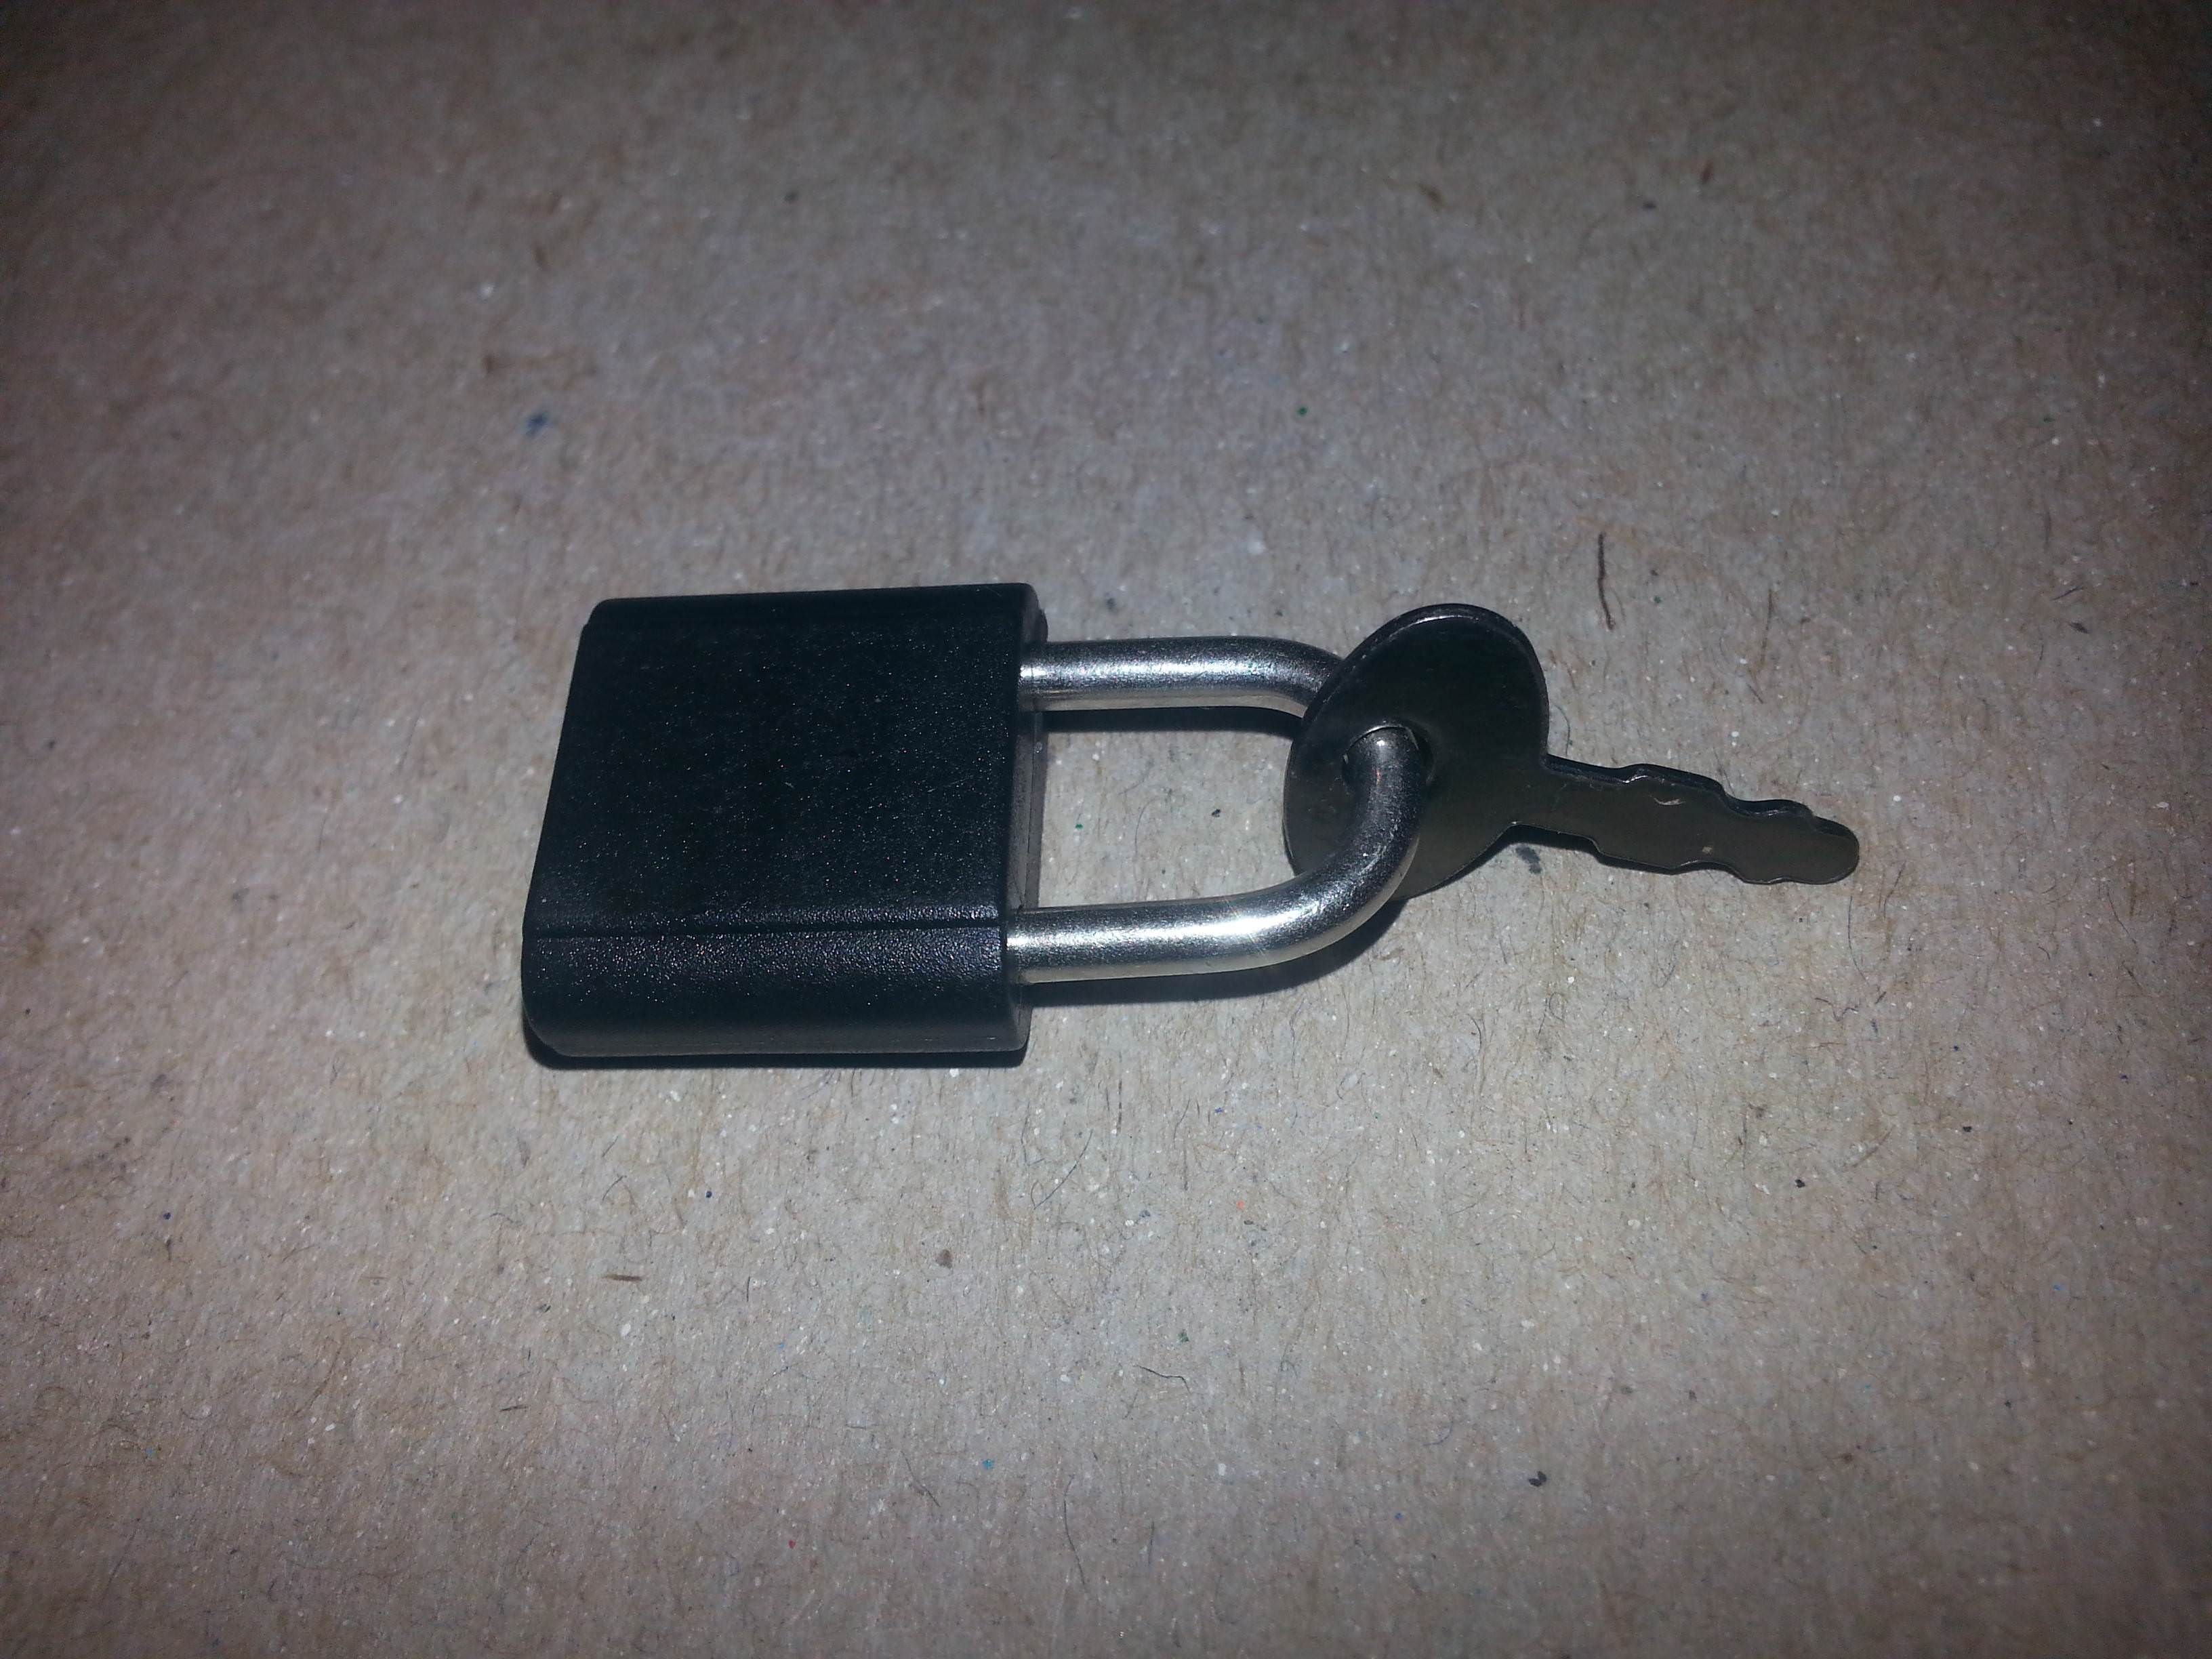 My 7 year old son's brilliant way to never lose the only key he has for this lock